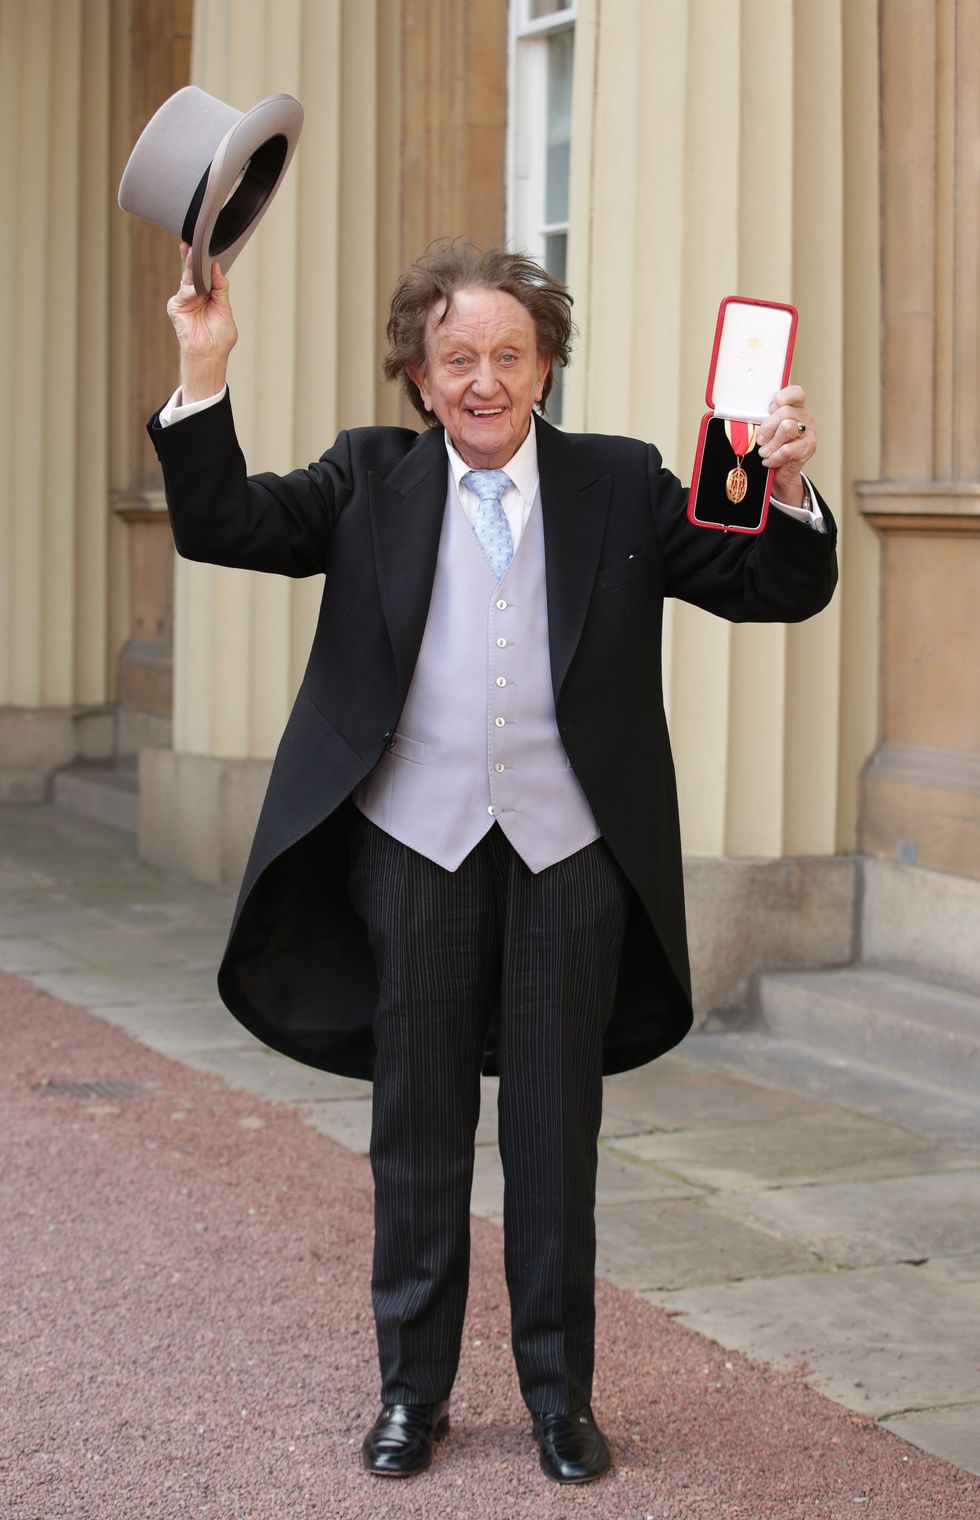 Ken Dodd, Recovery after being hospitalised for chest infection